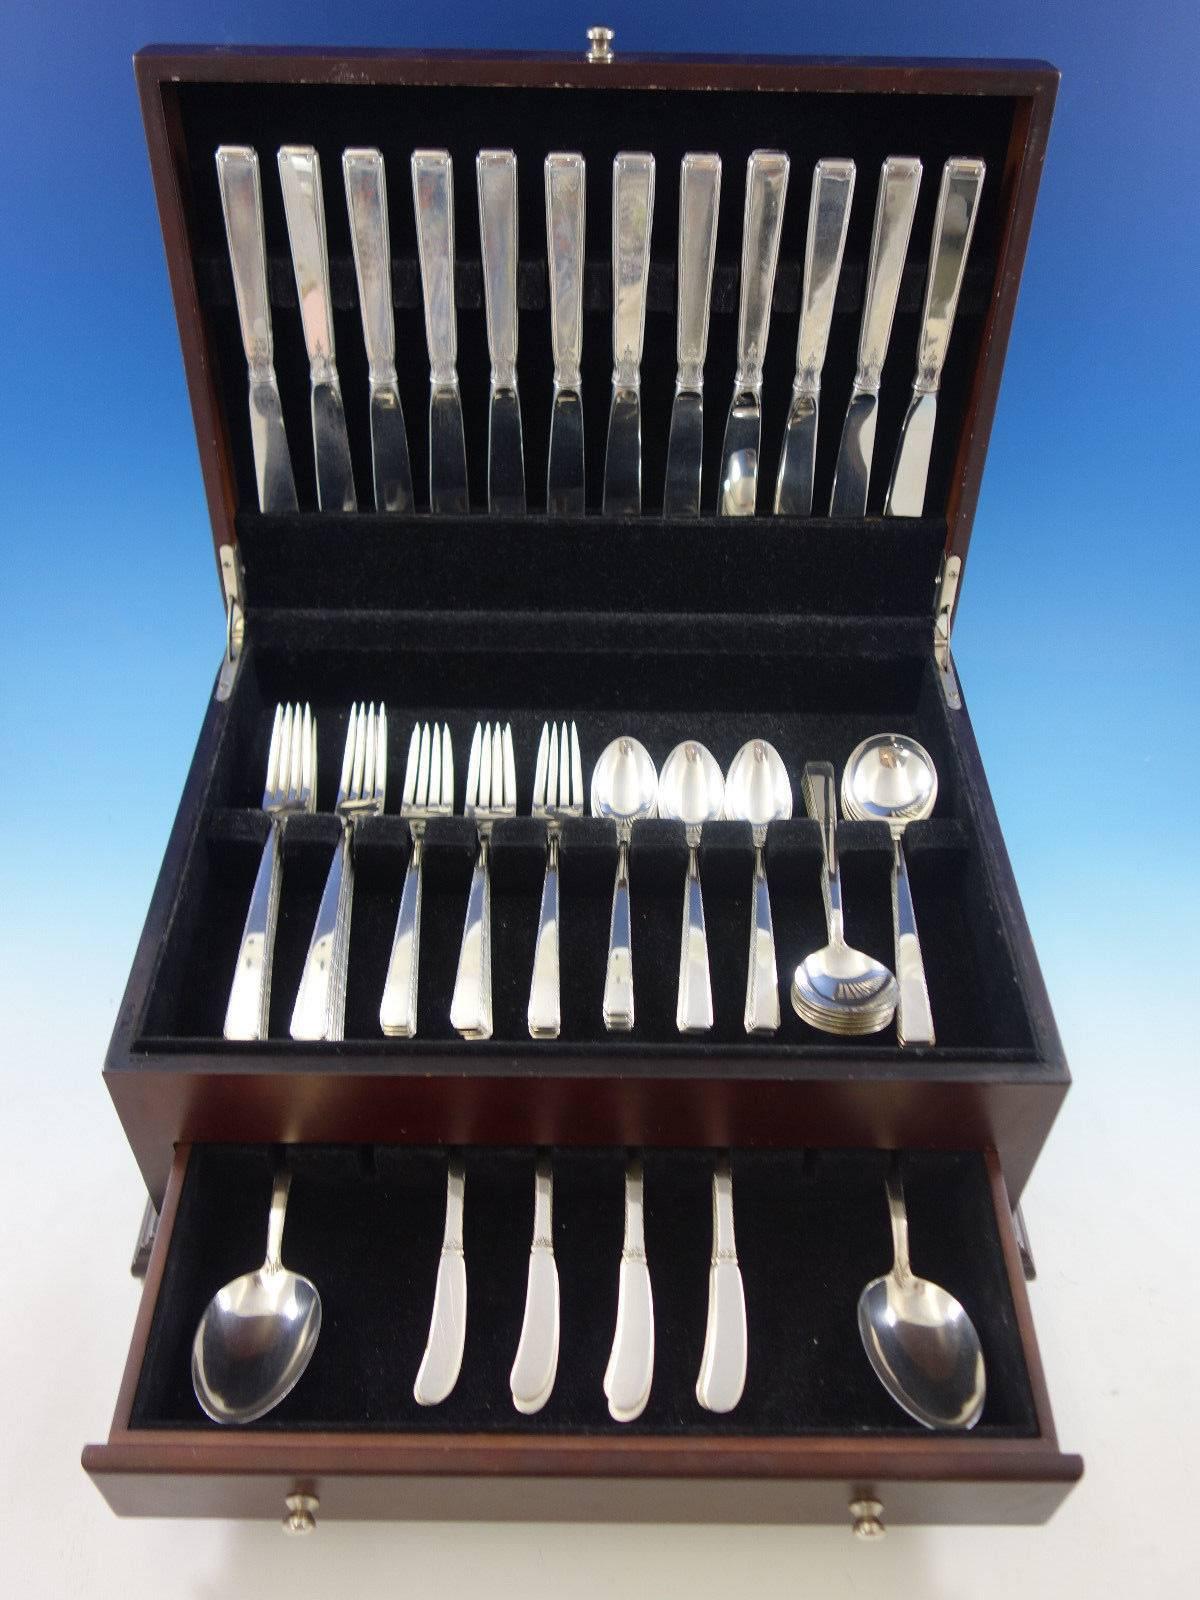 Old Lace by Towle sterling silver flatware set of 74 pieces. This set includes: 

12 knives, 9